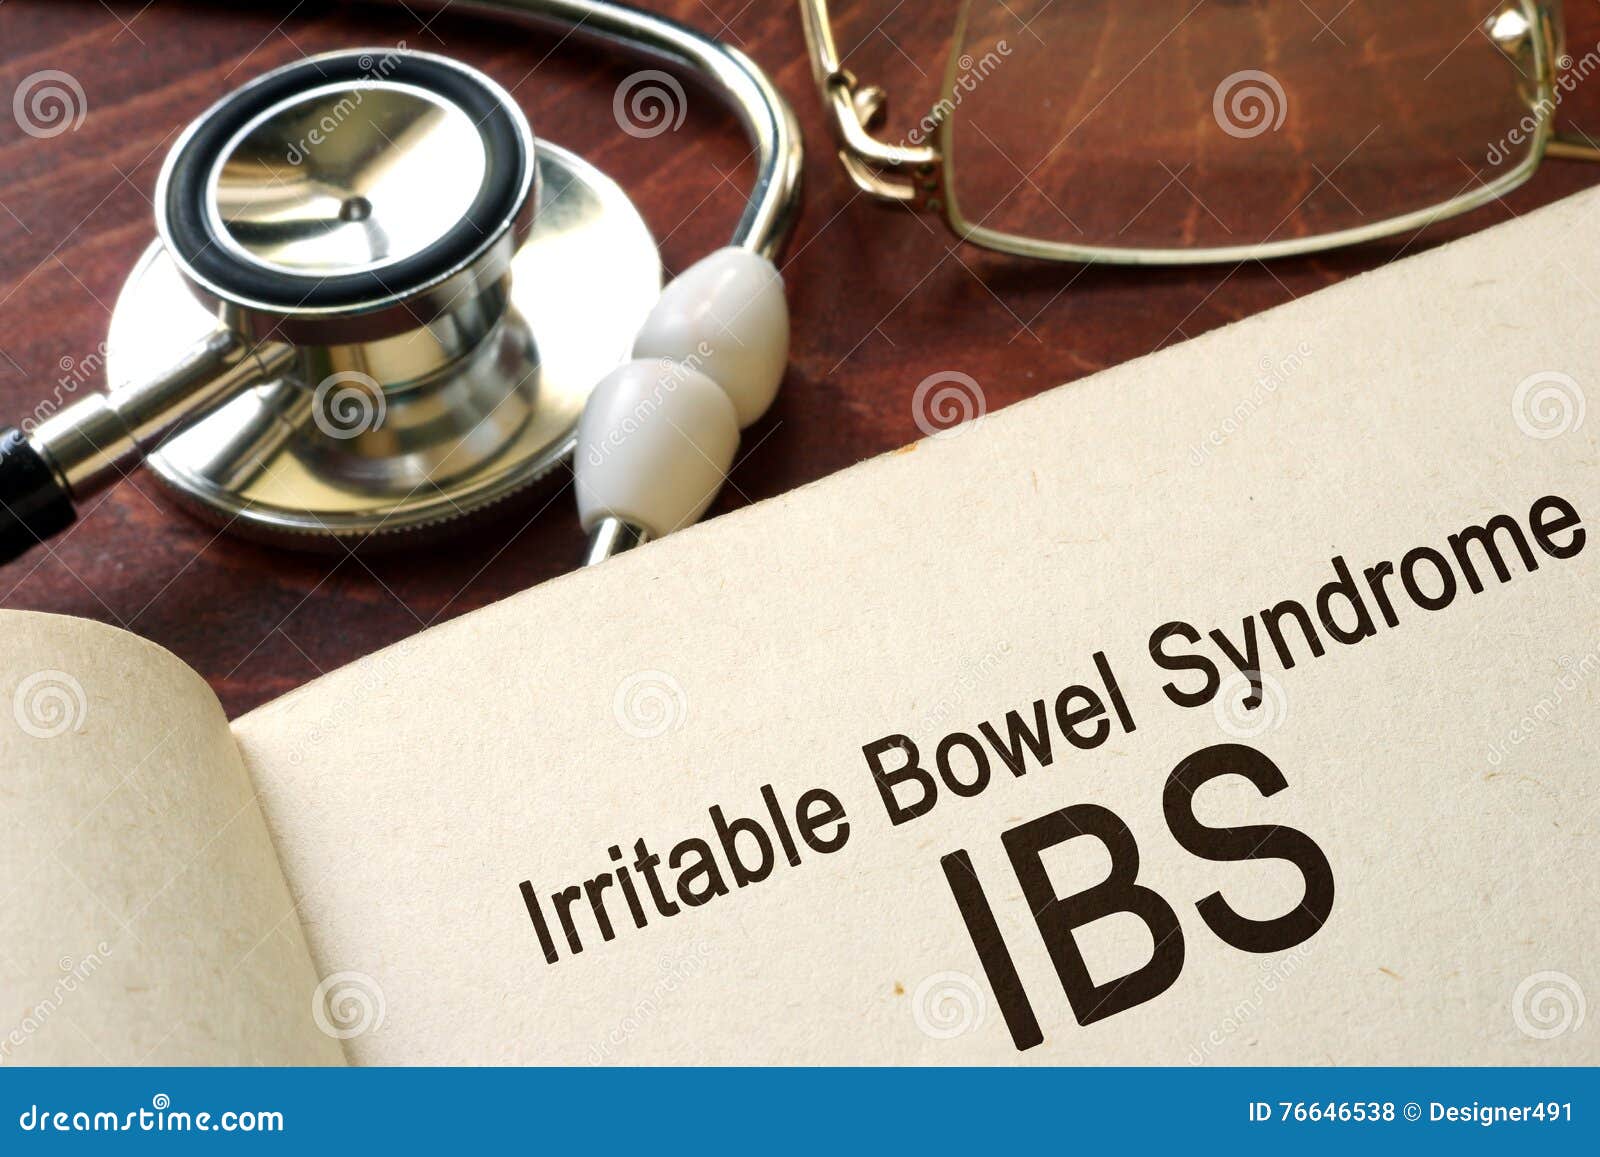 paper with words irritable bowel syndrome (ibs)